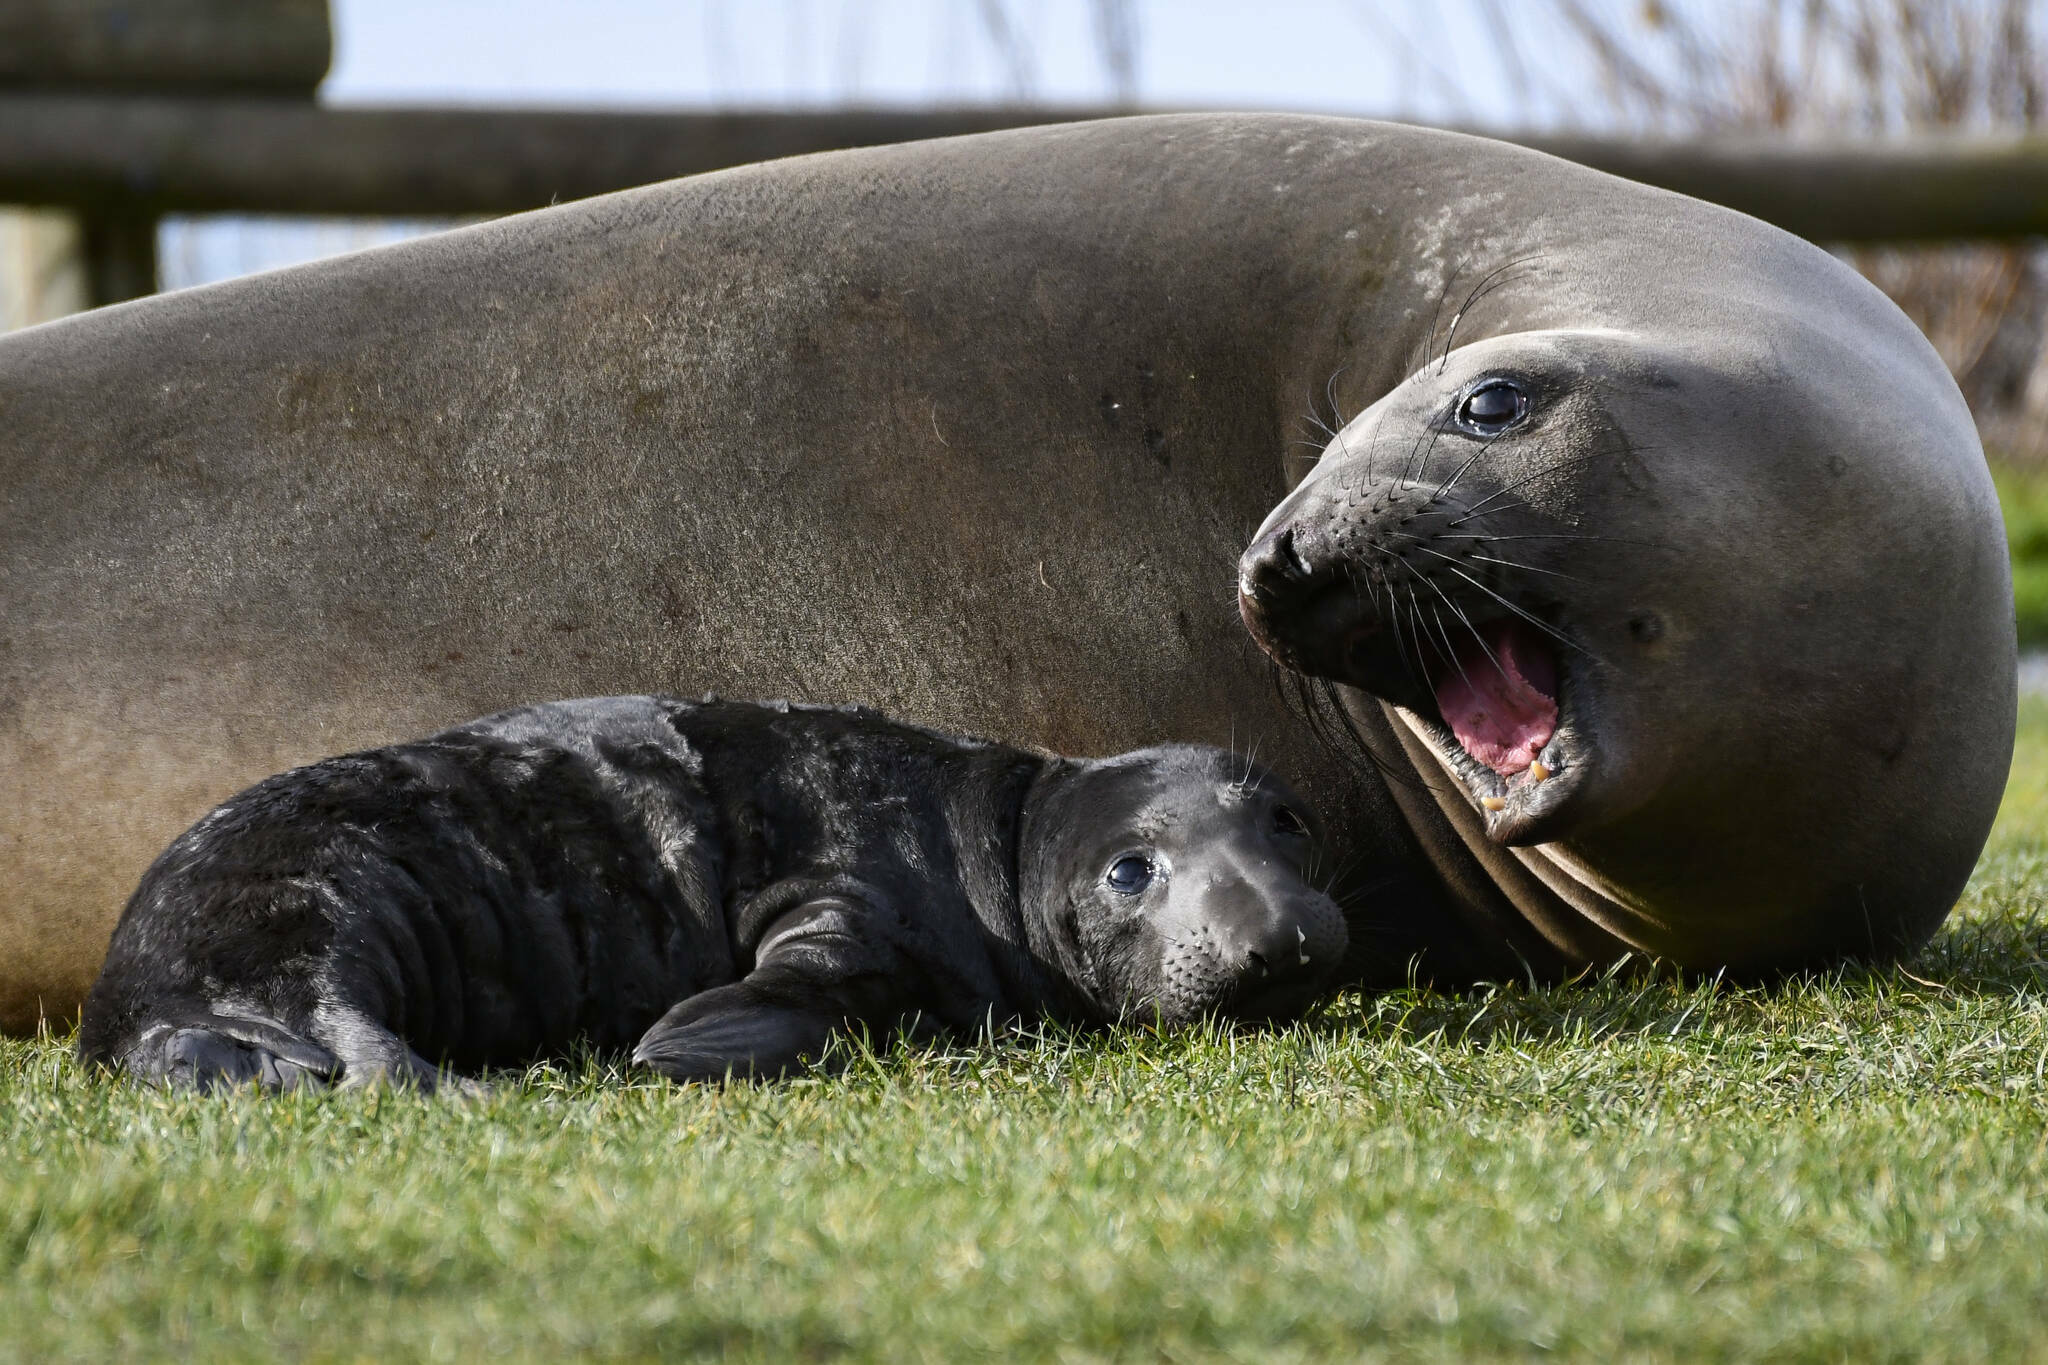 A baby elephant seal was born Jan. 31, 2022 in Deception Pass State Park. (Photo provided)